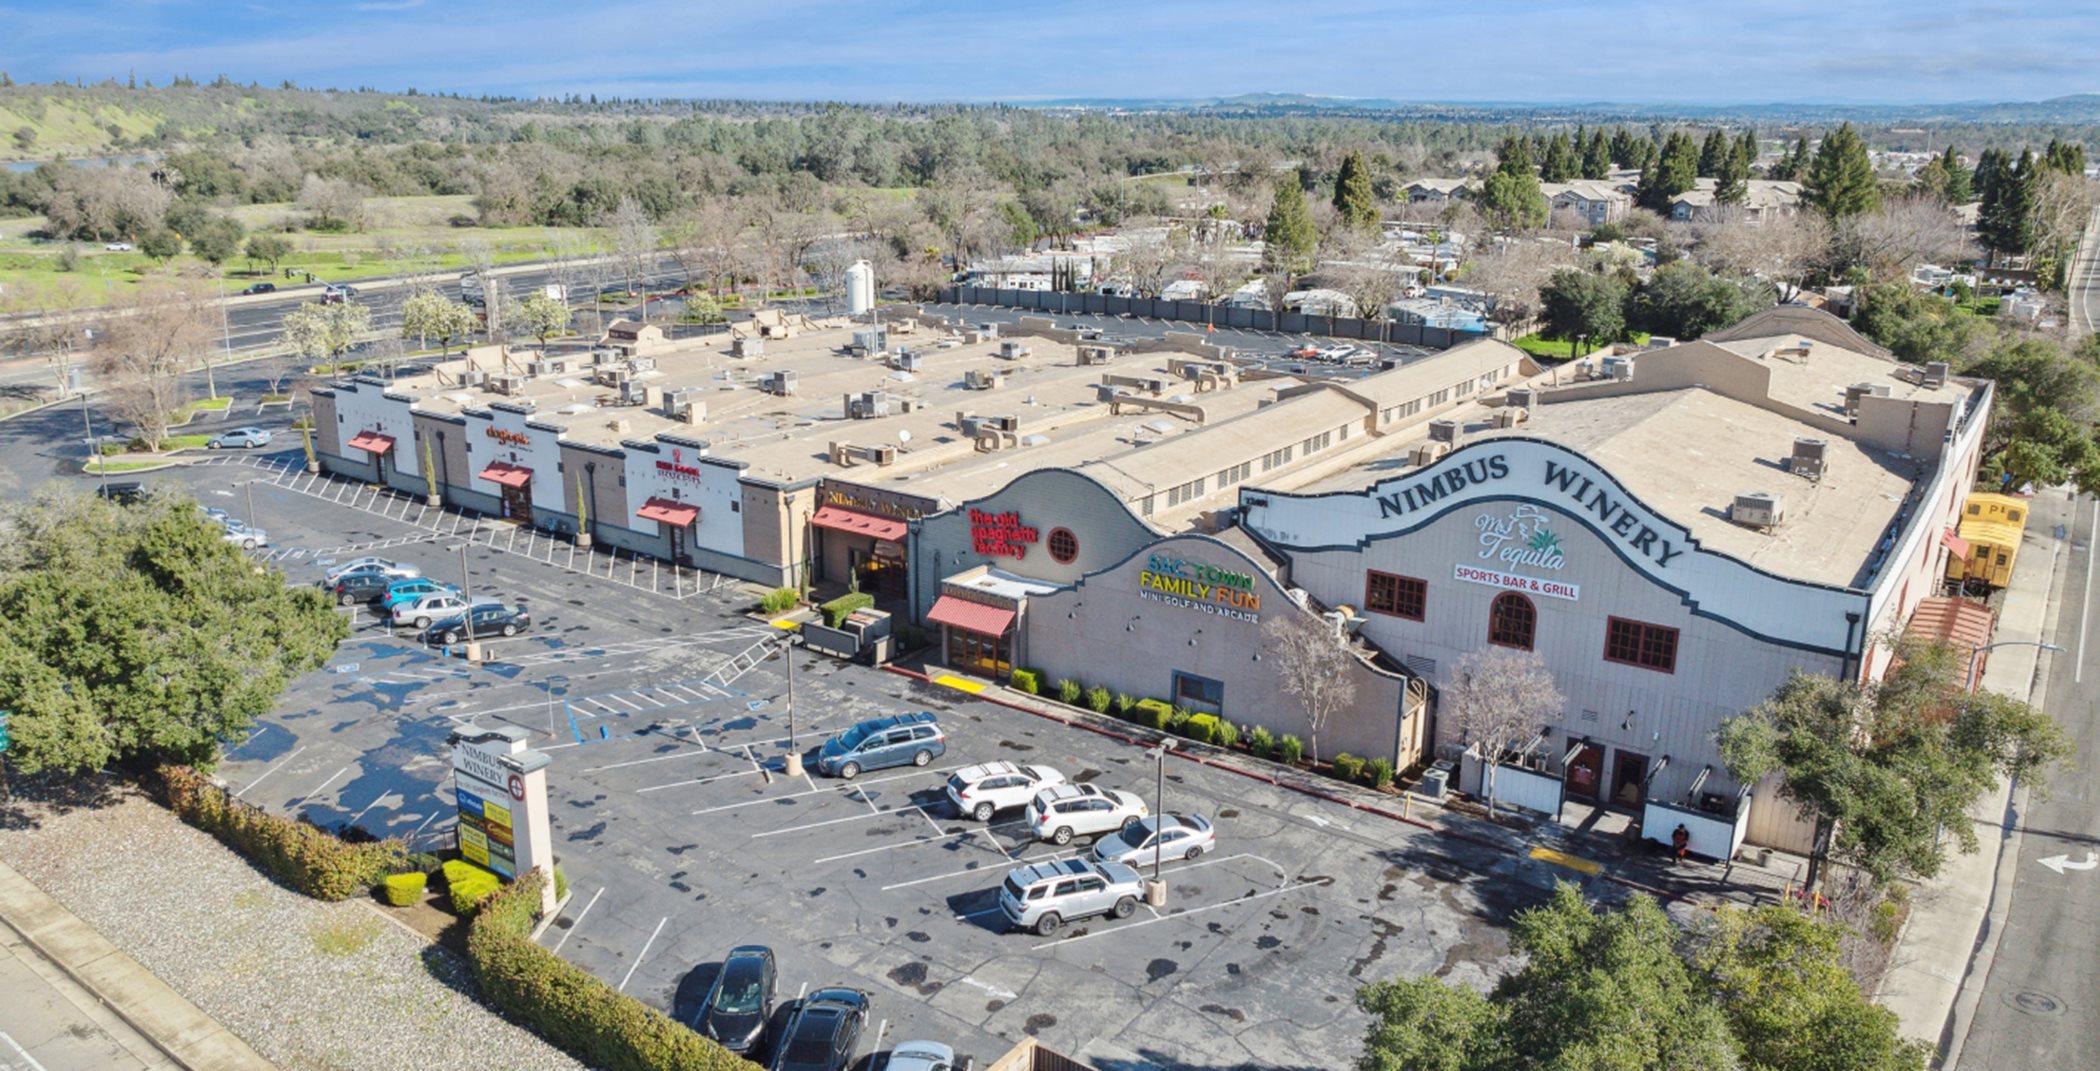 Aerial view of nimbus winery mall and parking lot